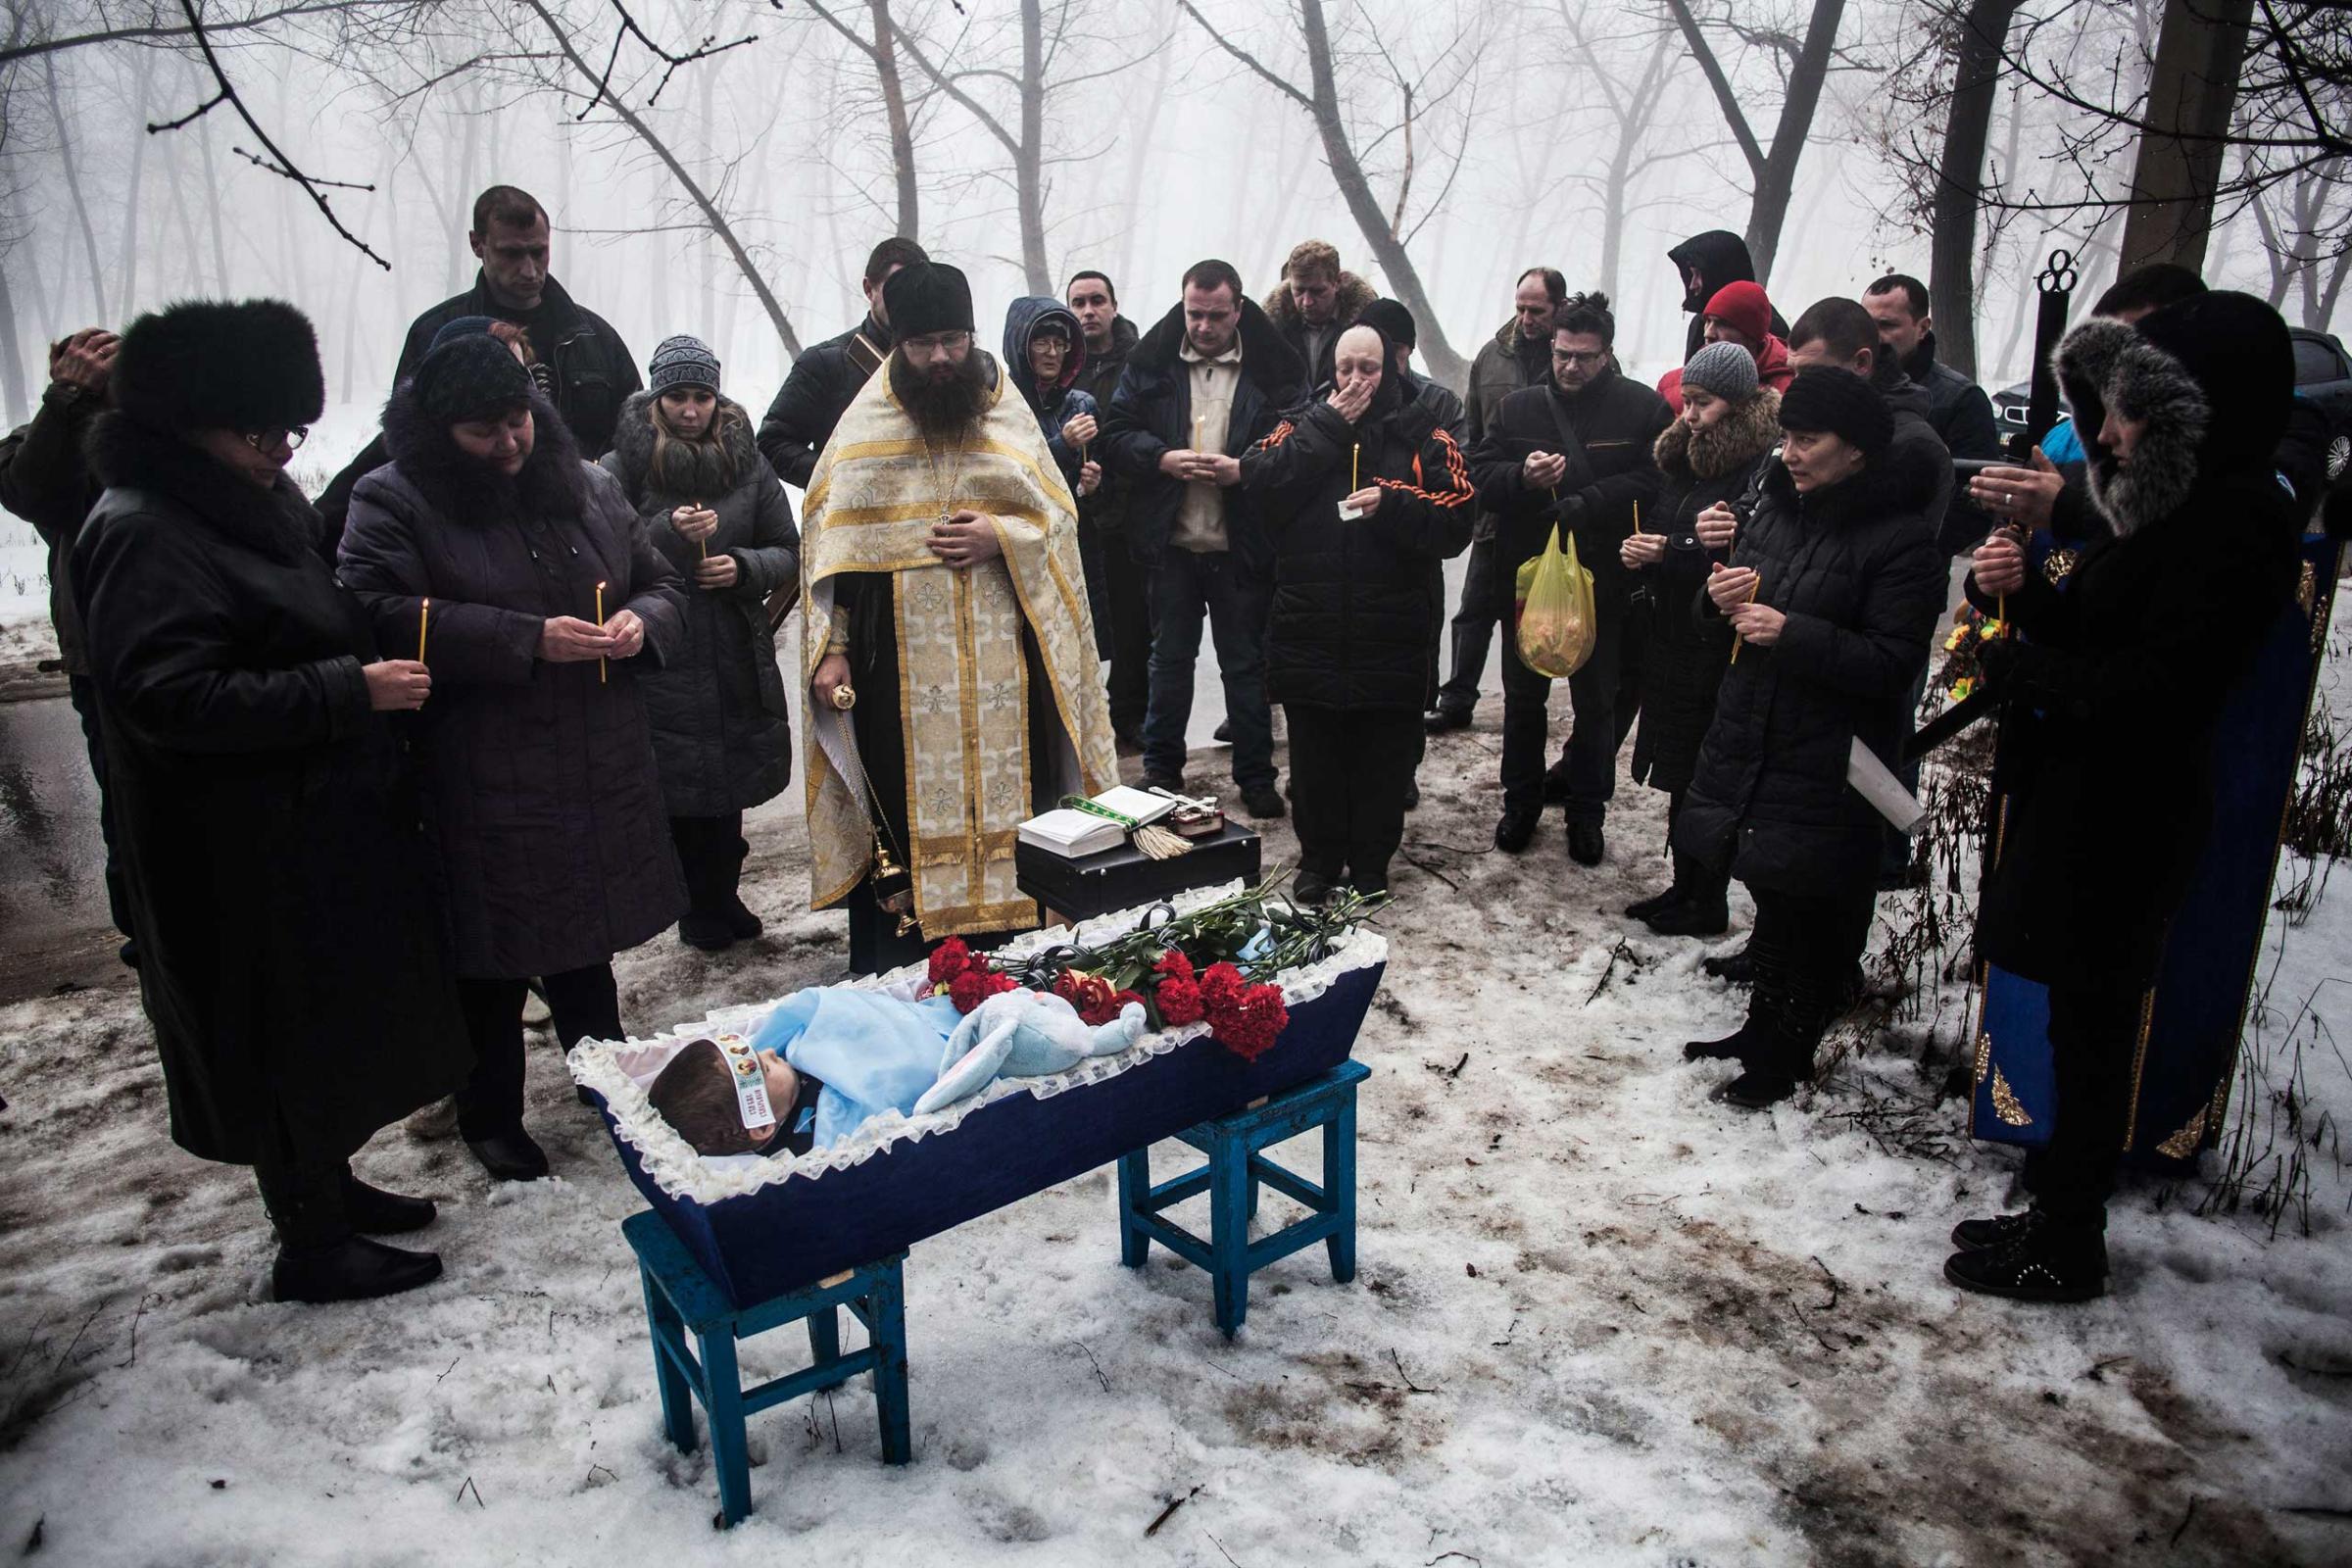 Mourners gather around a coffin bearing Artiam, 4, who was killed in a Ukrainian army artillery strike, during his funeral in Kuivisevsky district on the outskirts of Donetsk, eastern Ukraine. Jan. 20, 2015